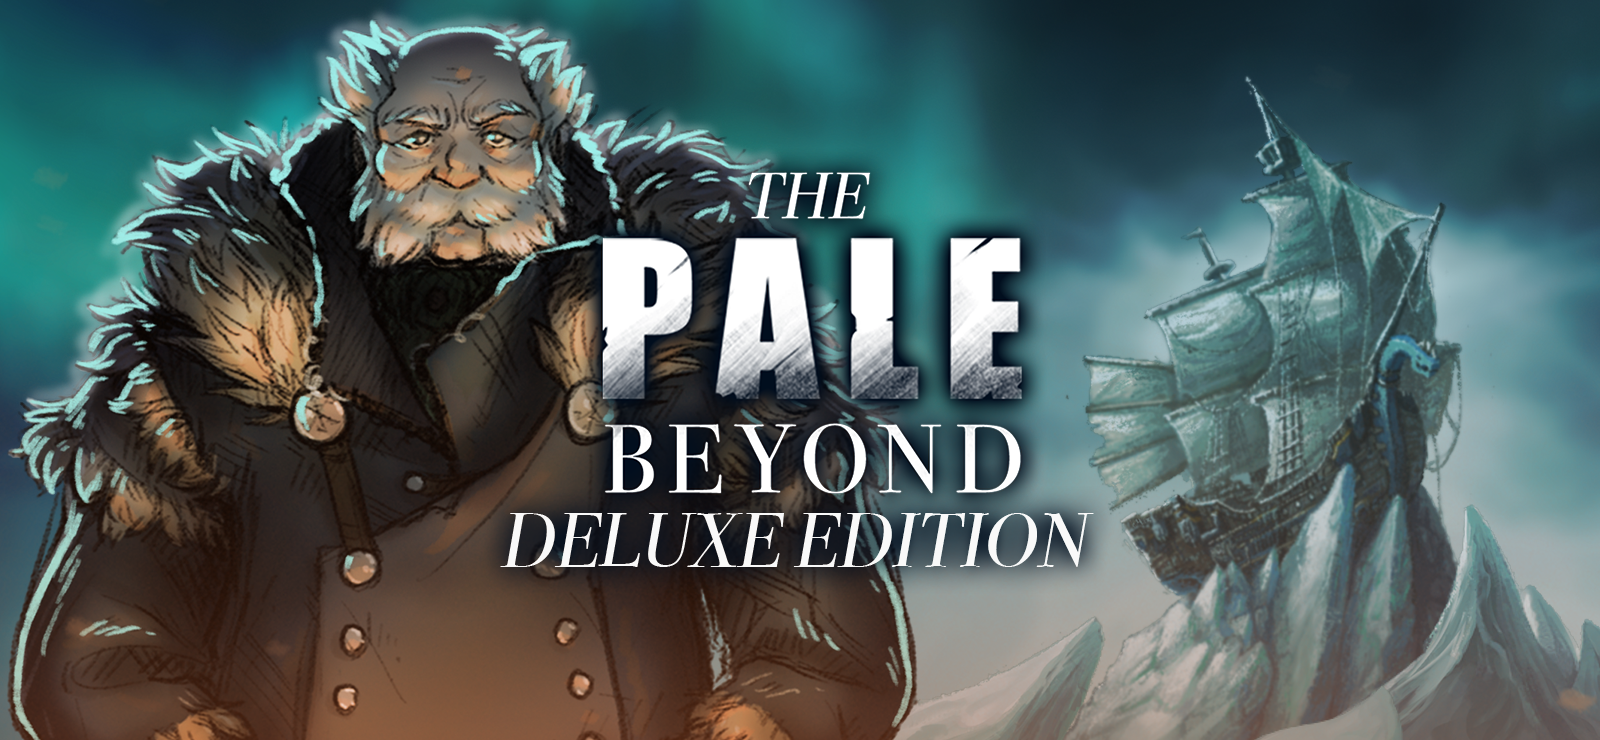 The Pale Beyond - Deluxe Edition